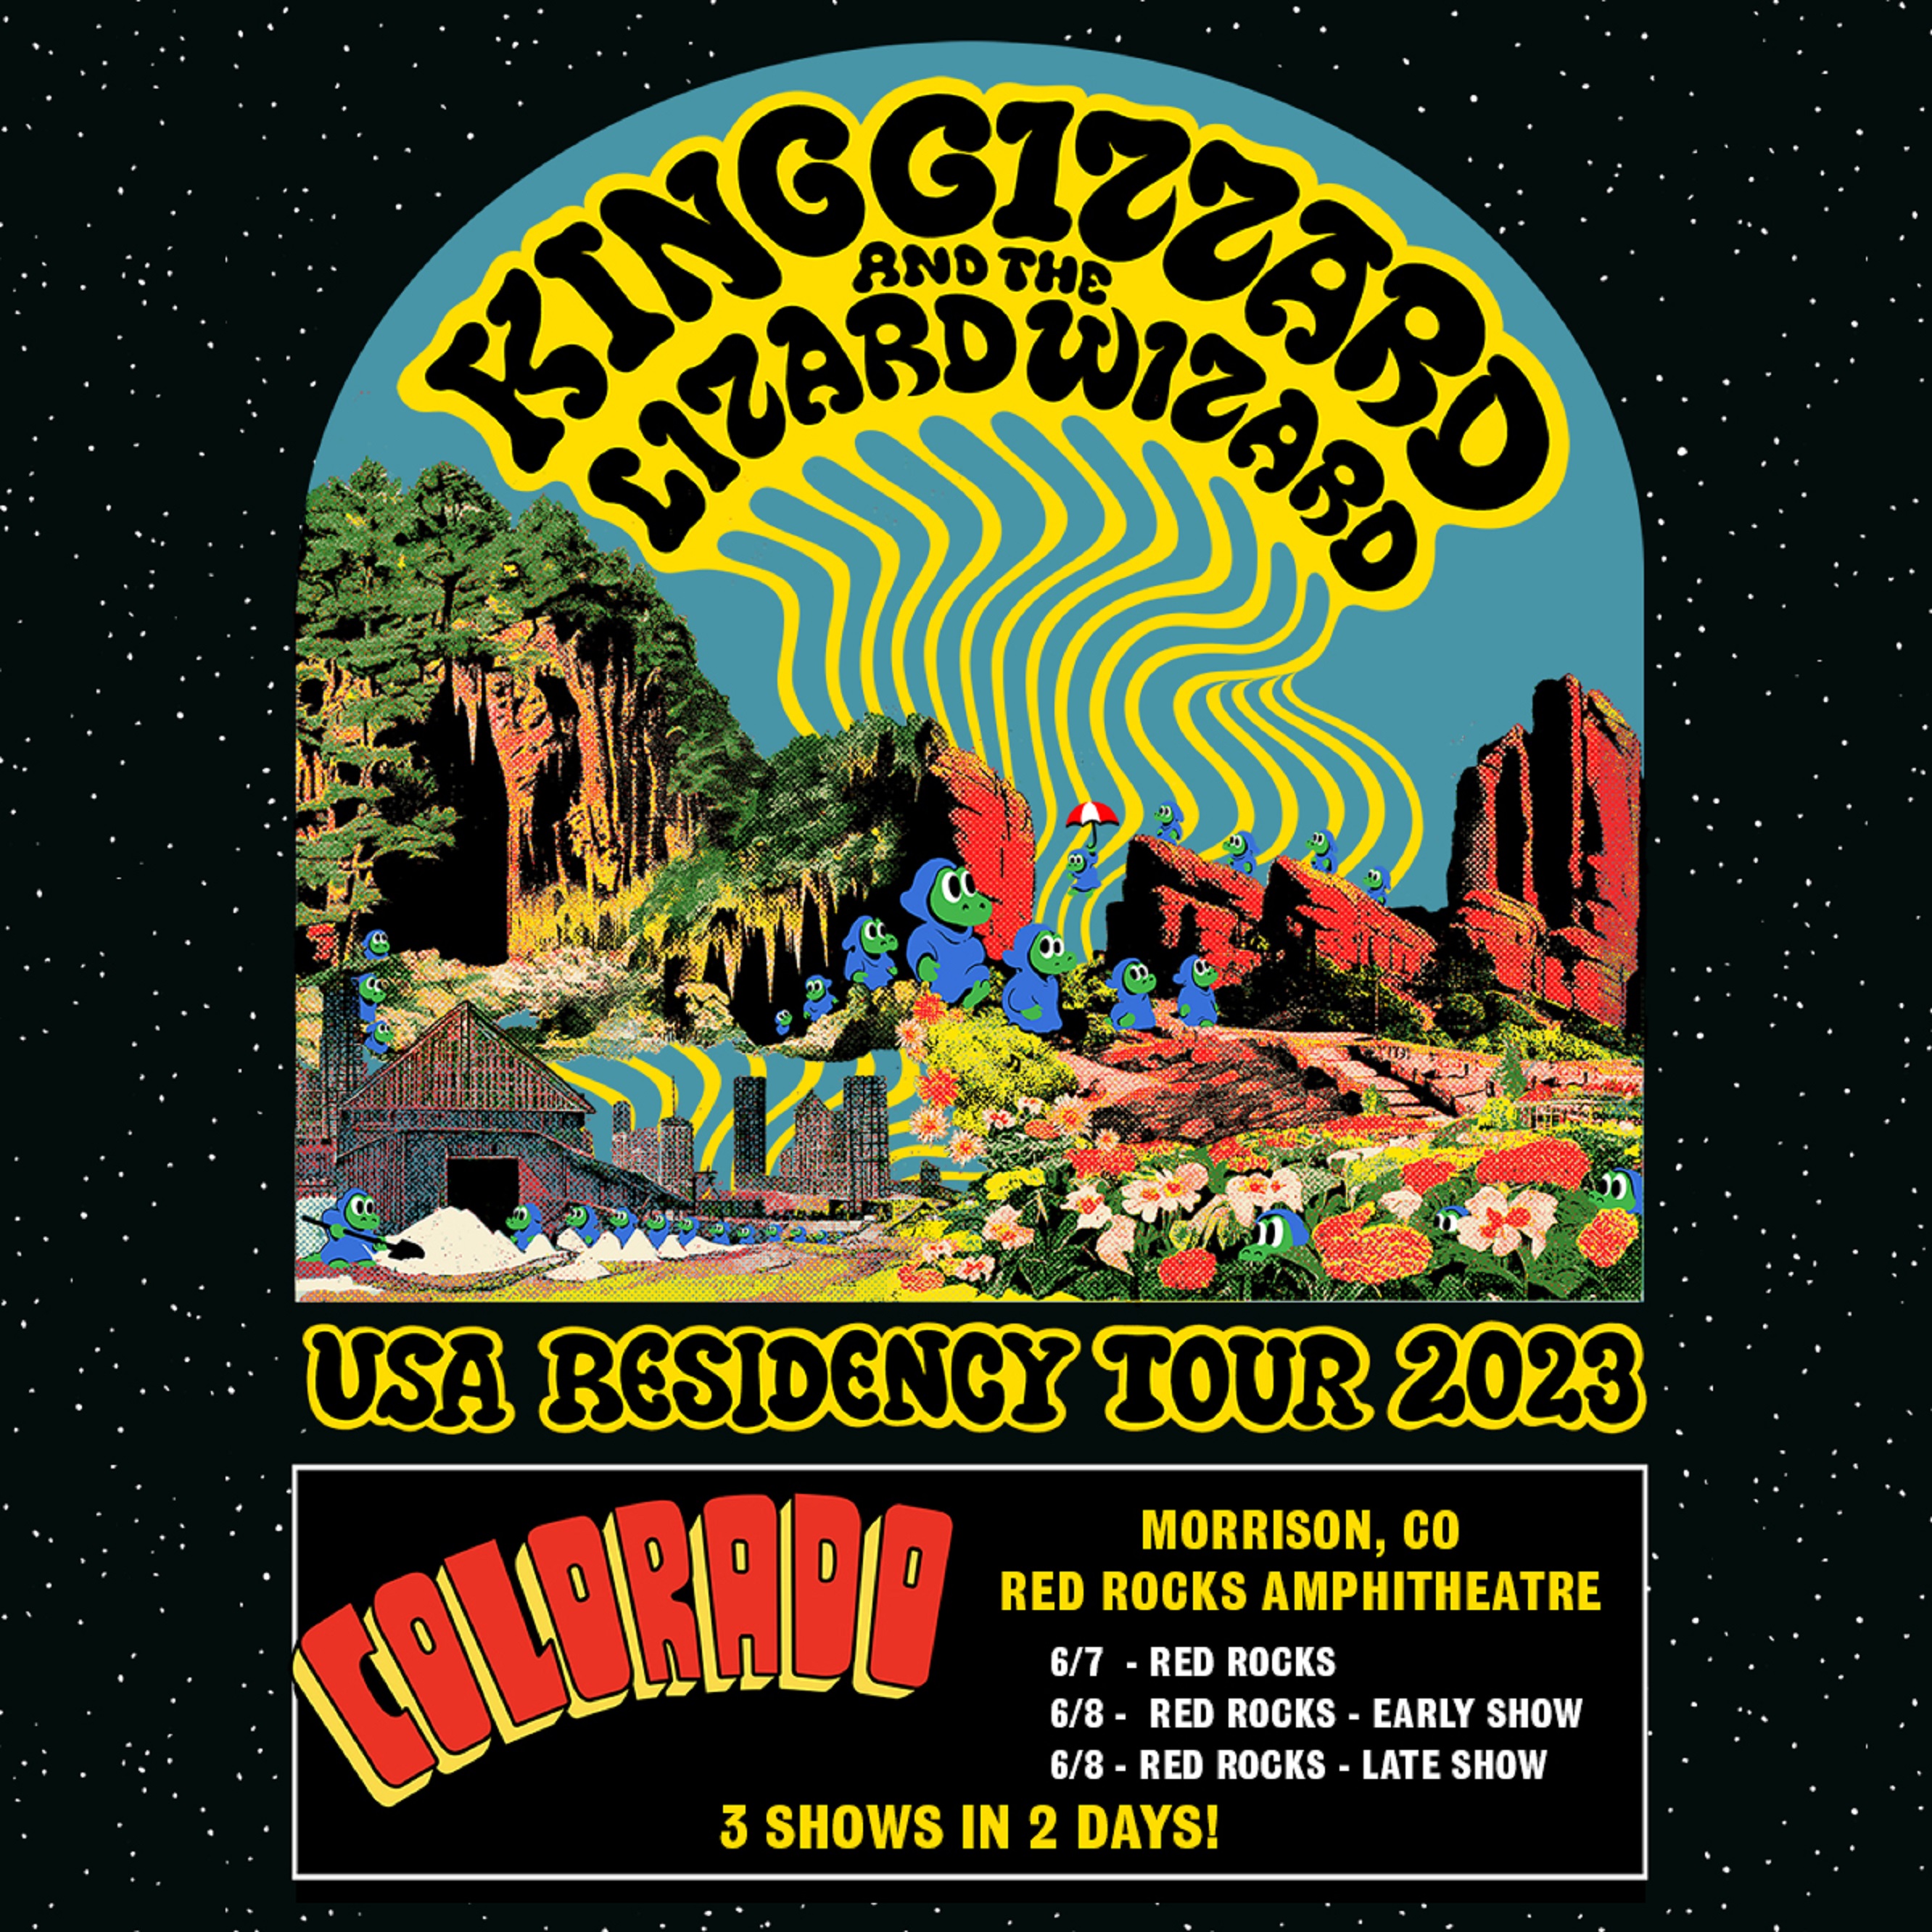 KING GIZZARD & THE LIZARD WIZARD - Red Rocks Amphitheatre - 3 Shows in 2 Days! June 7 & 8, 2023